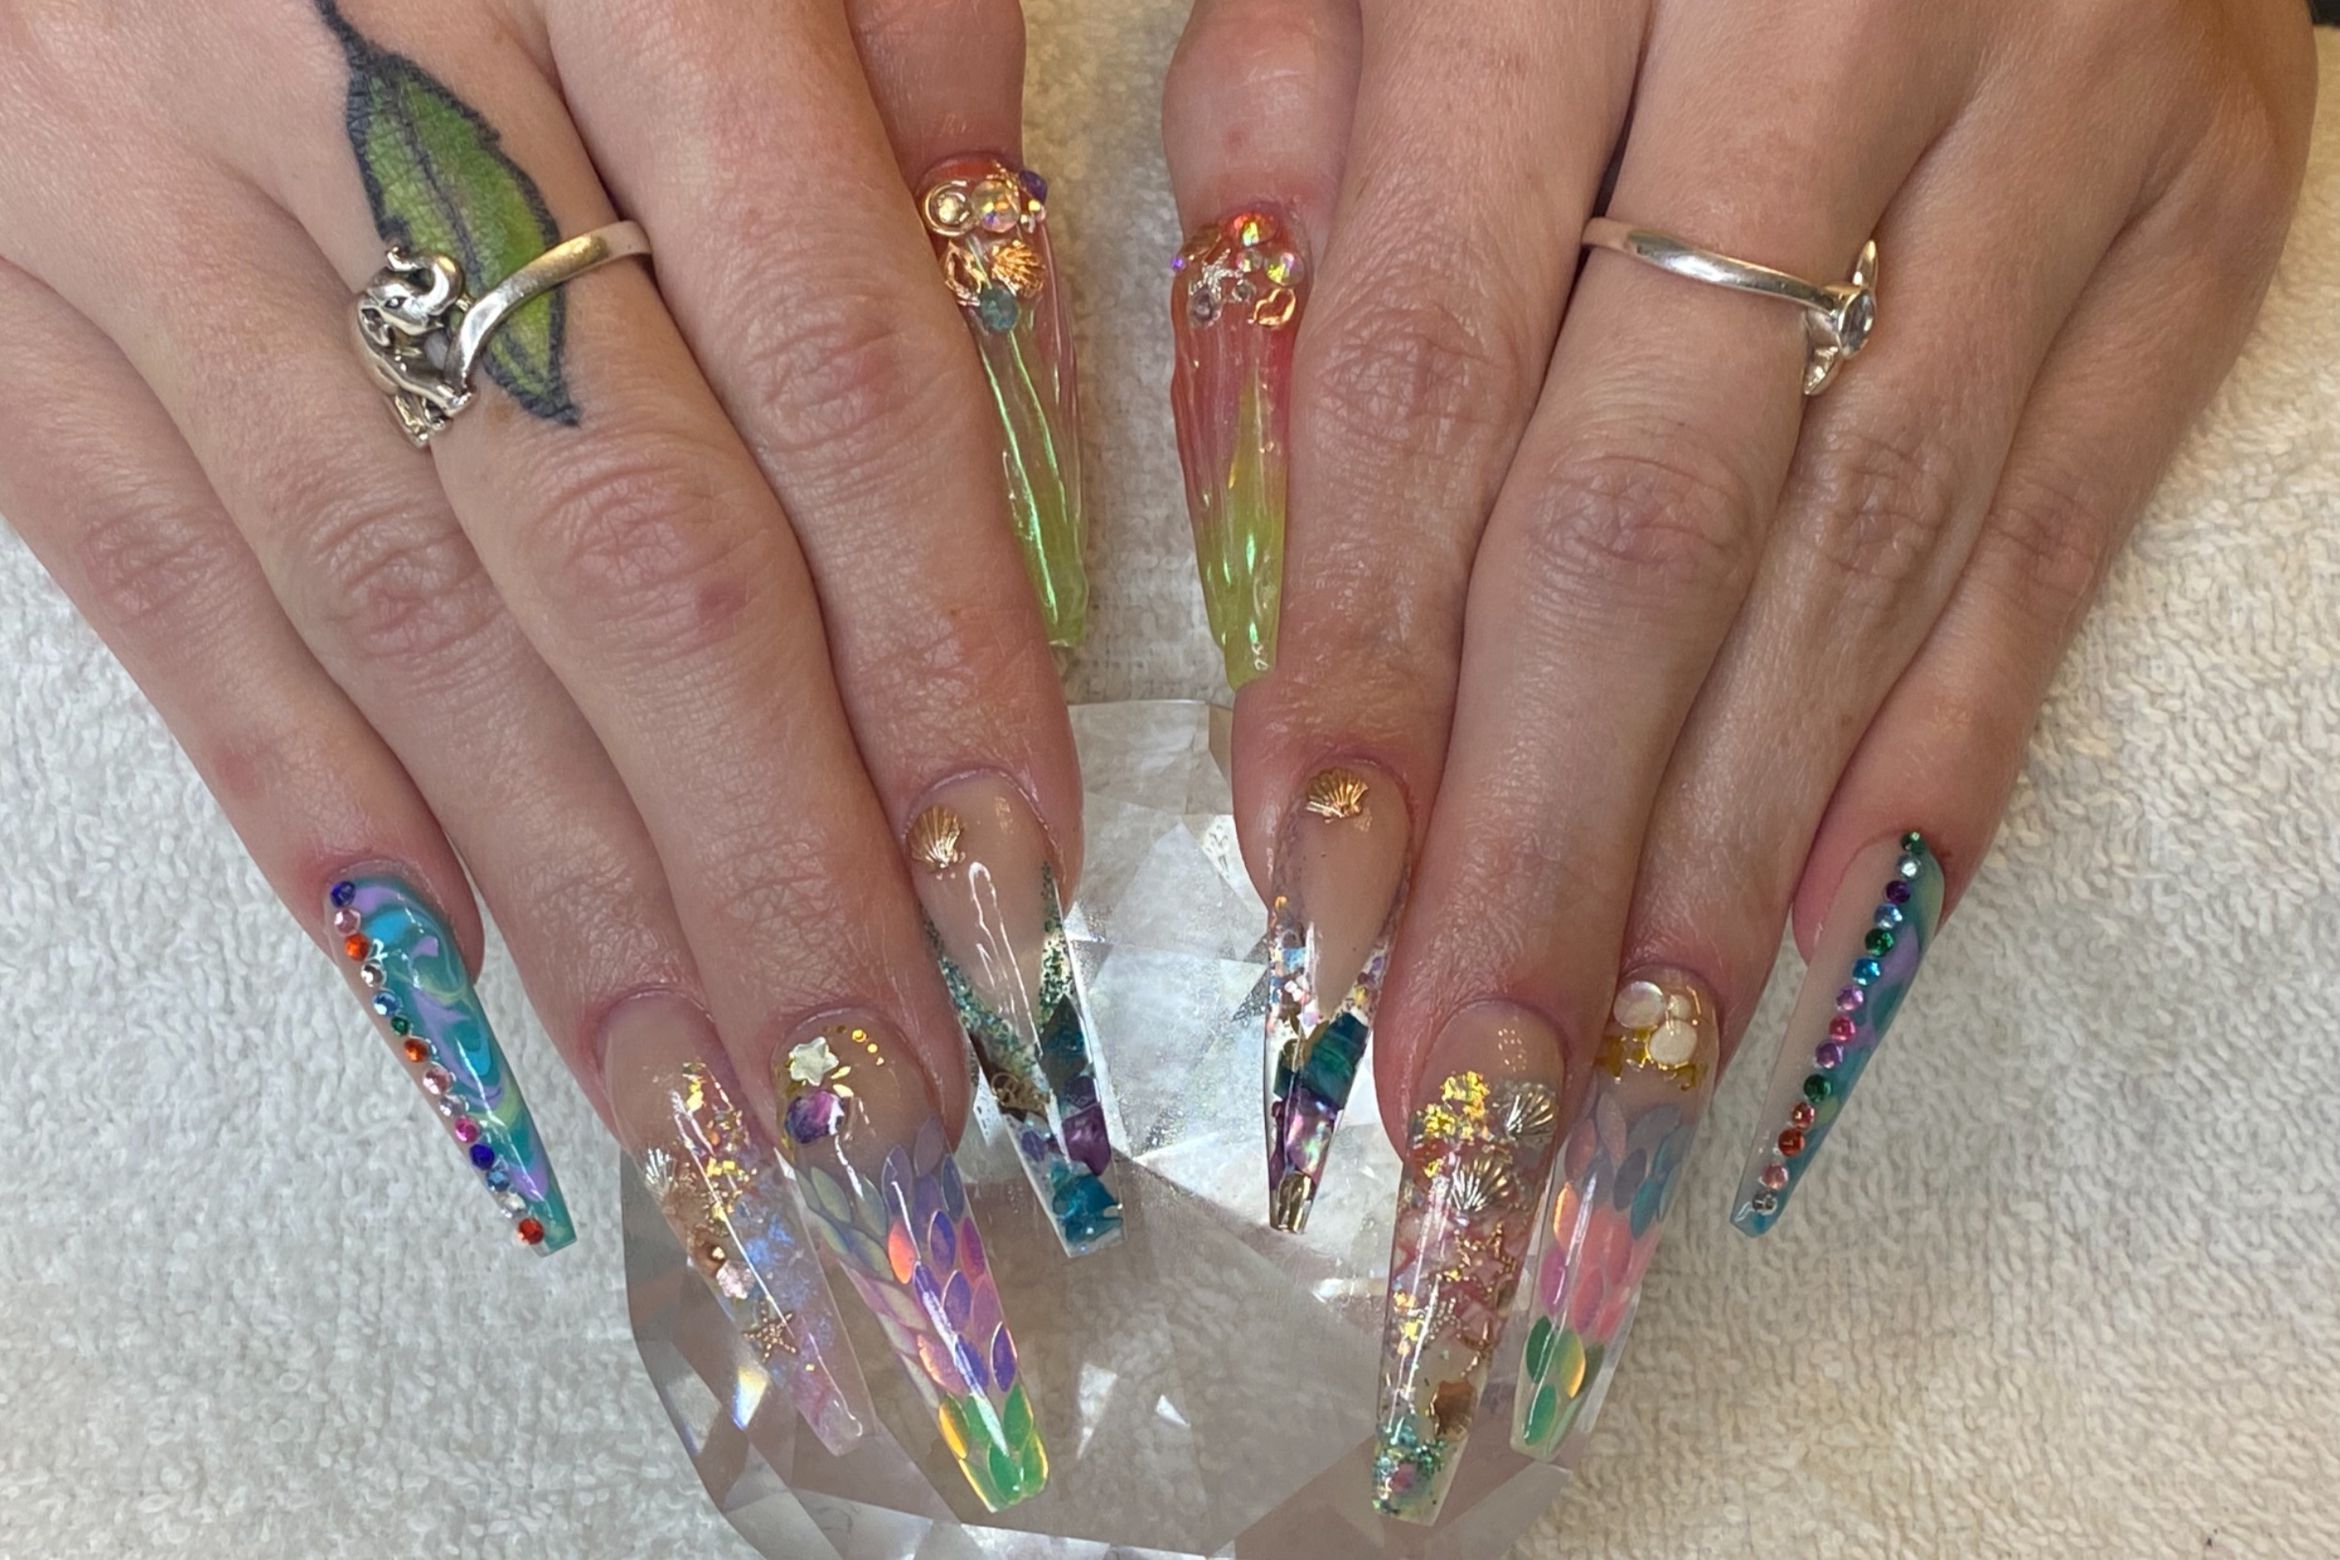 Top 7 Nail Salons Near You In Winston-salem Nc - Find The Best Nail Salon For You